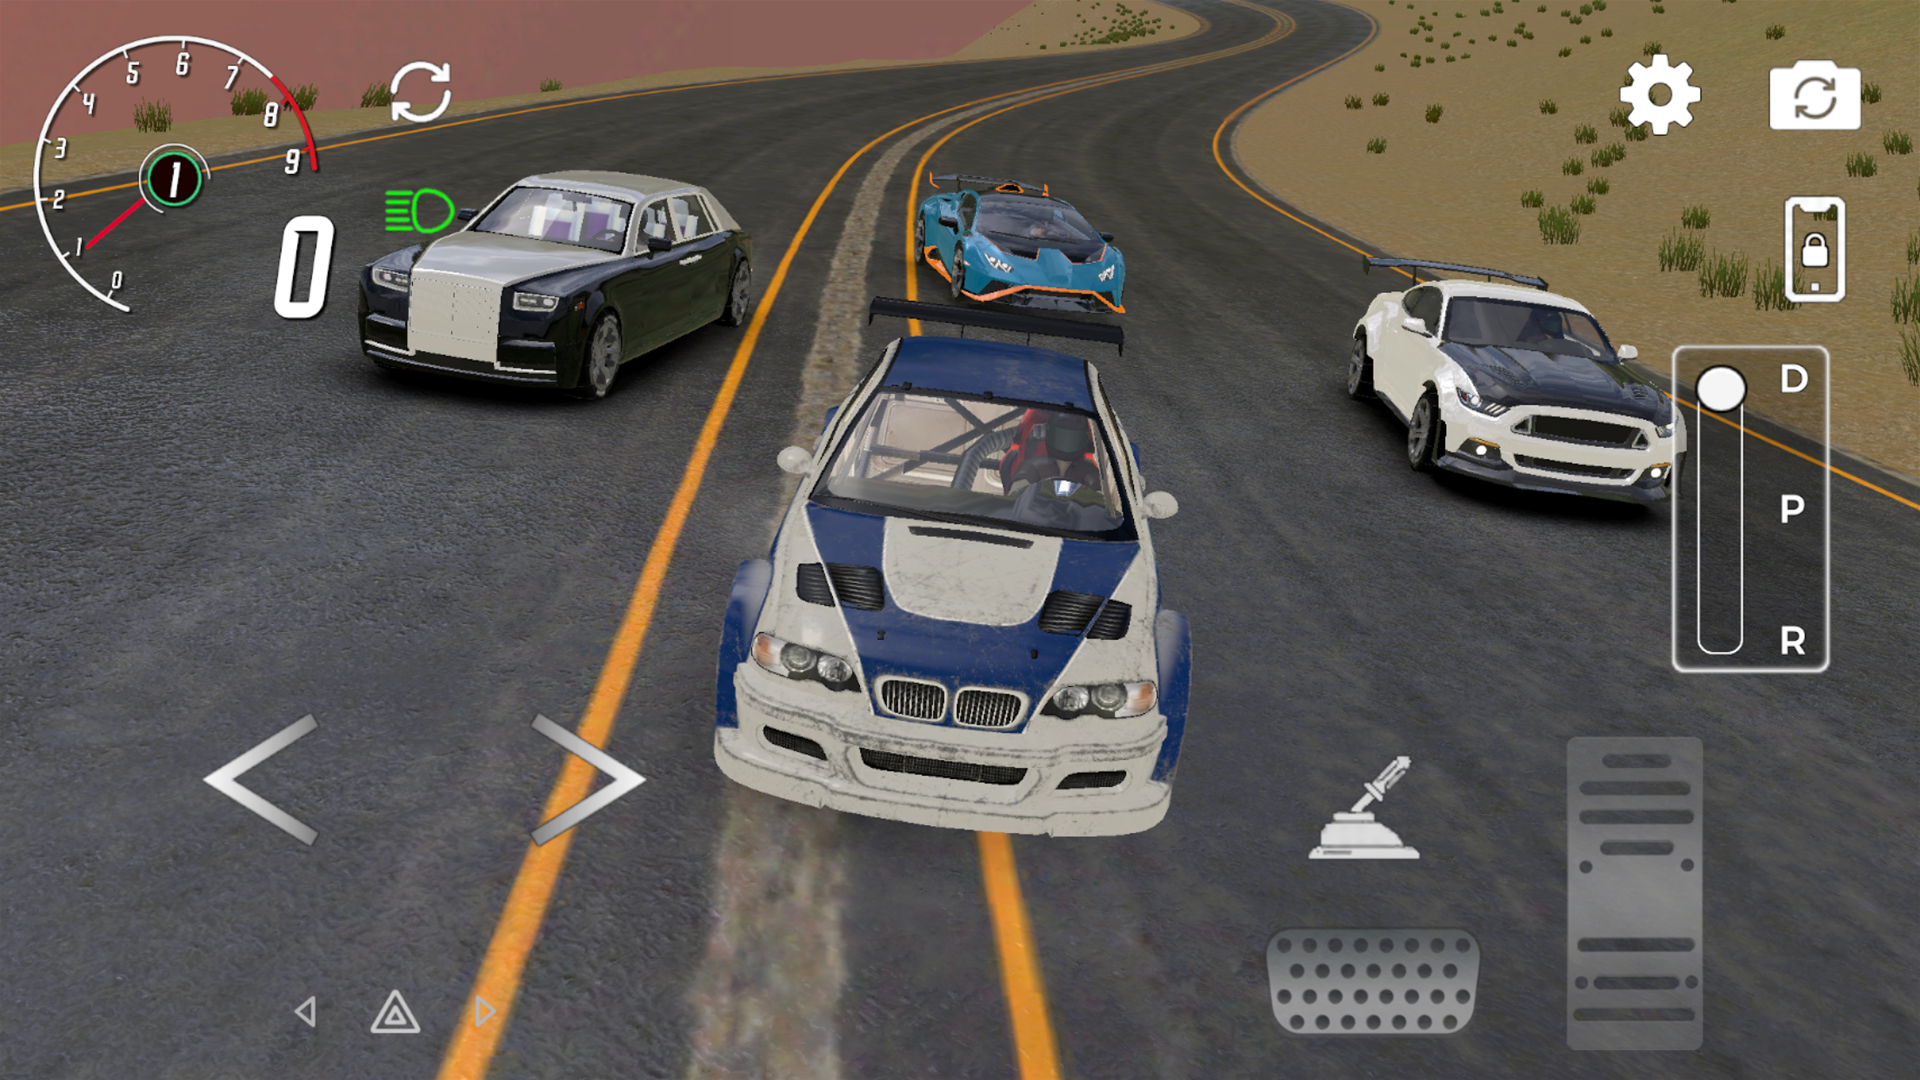 Download Car Parking Multiplayer 2 APK Mod for Android